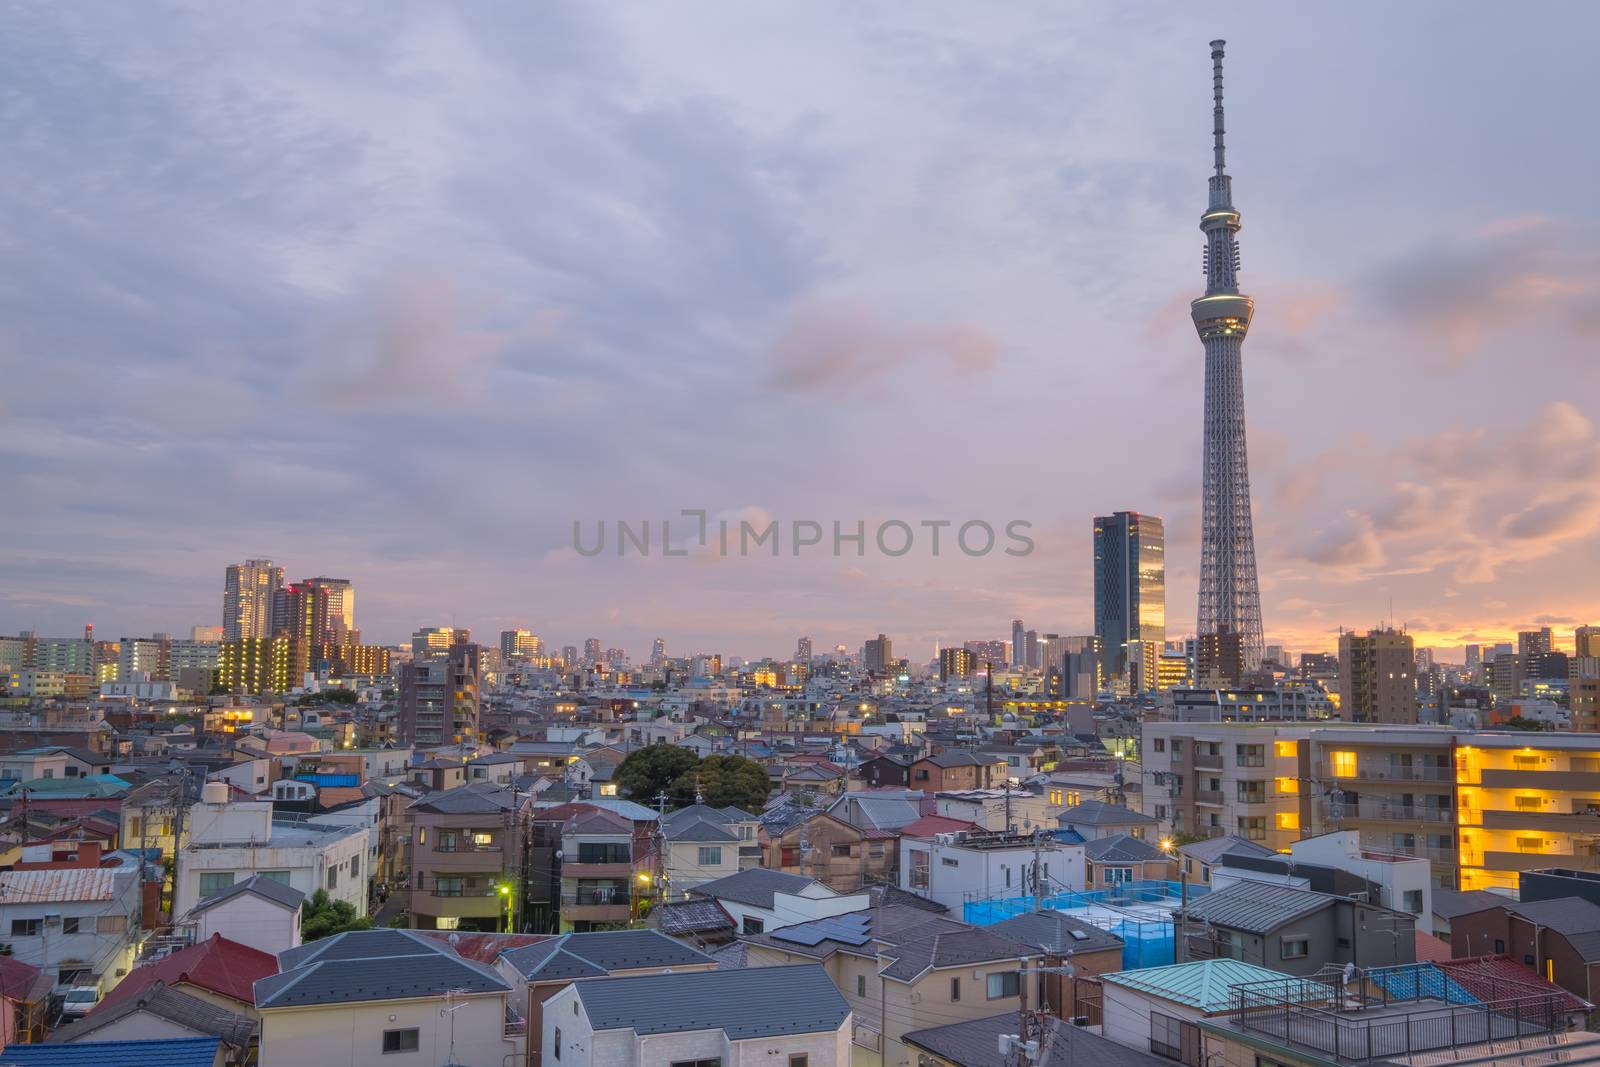 Tokyo sky tree at sunset time